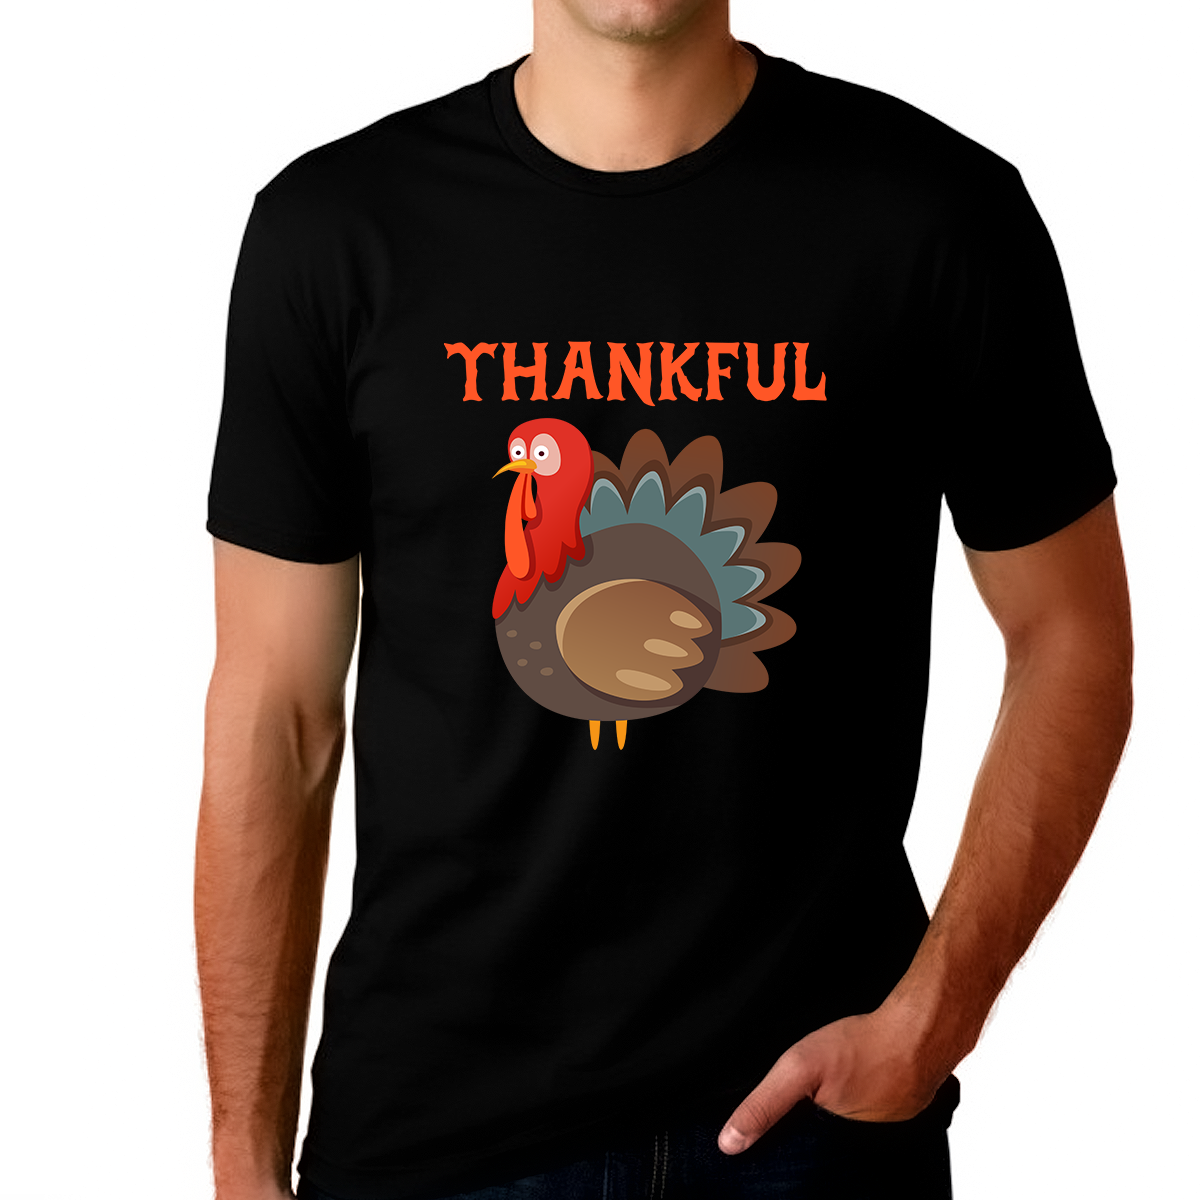 Thanksgiving Shirts for Men Fall Clothes for Men Thanksgiving Shirt Fall Shirts for Men Cool Fall Shirts